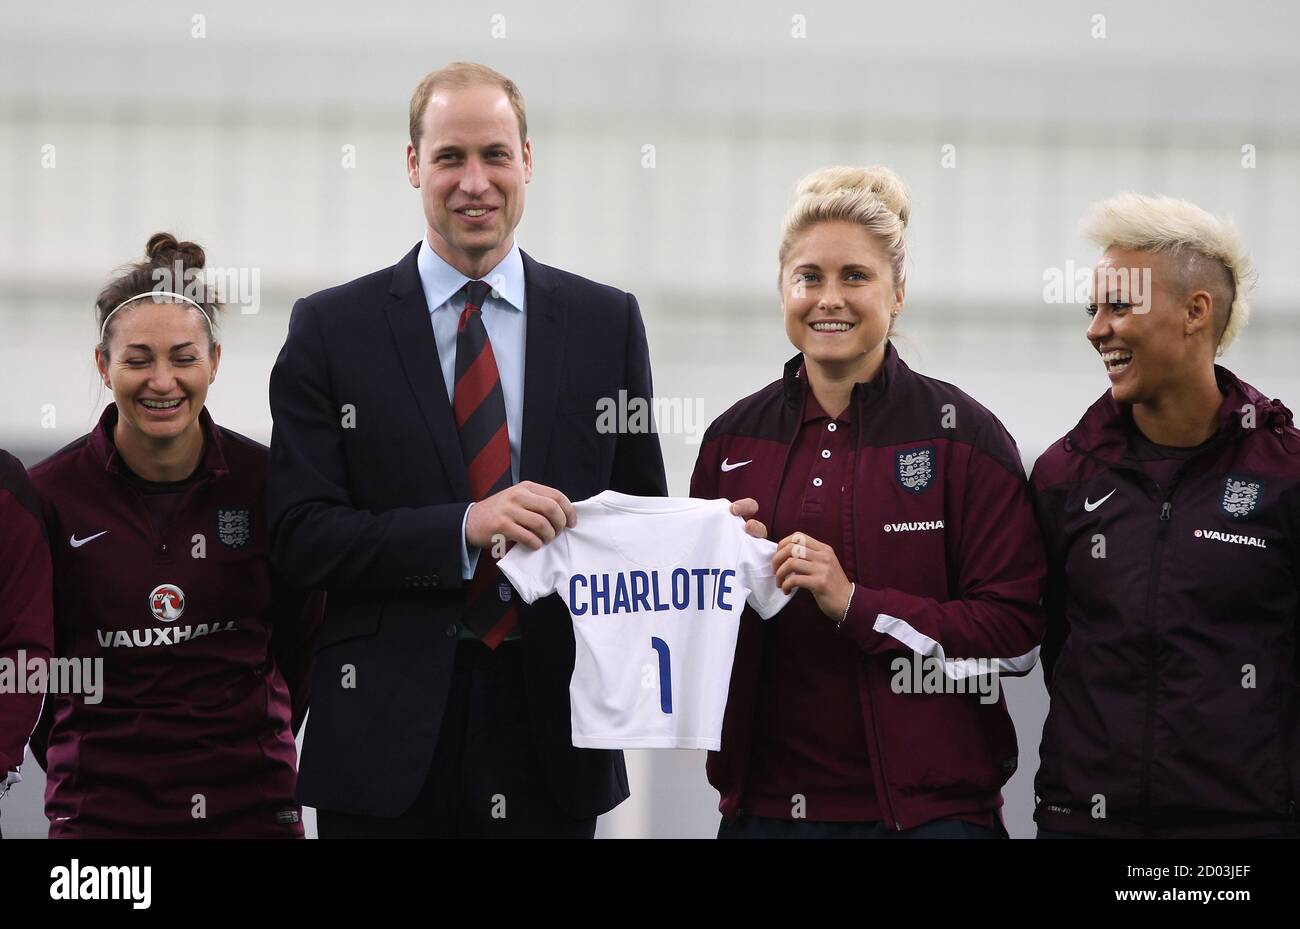 Britain's Prince William holds a shirt with his new daughter's name during a visit to the England ladies soccer World Cup squad at St George's Park, Burton, Britain, May 20, 2015.  REUTERS/Bradley Ormesher/Pool Stock Photo